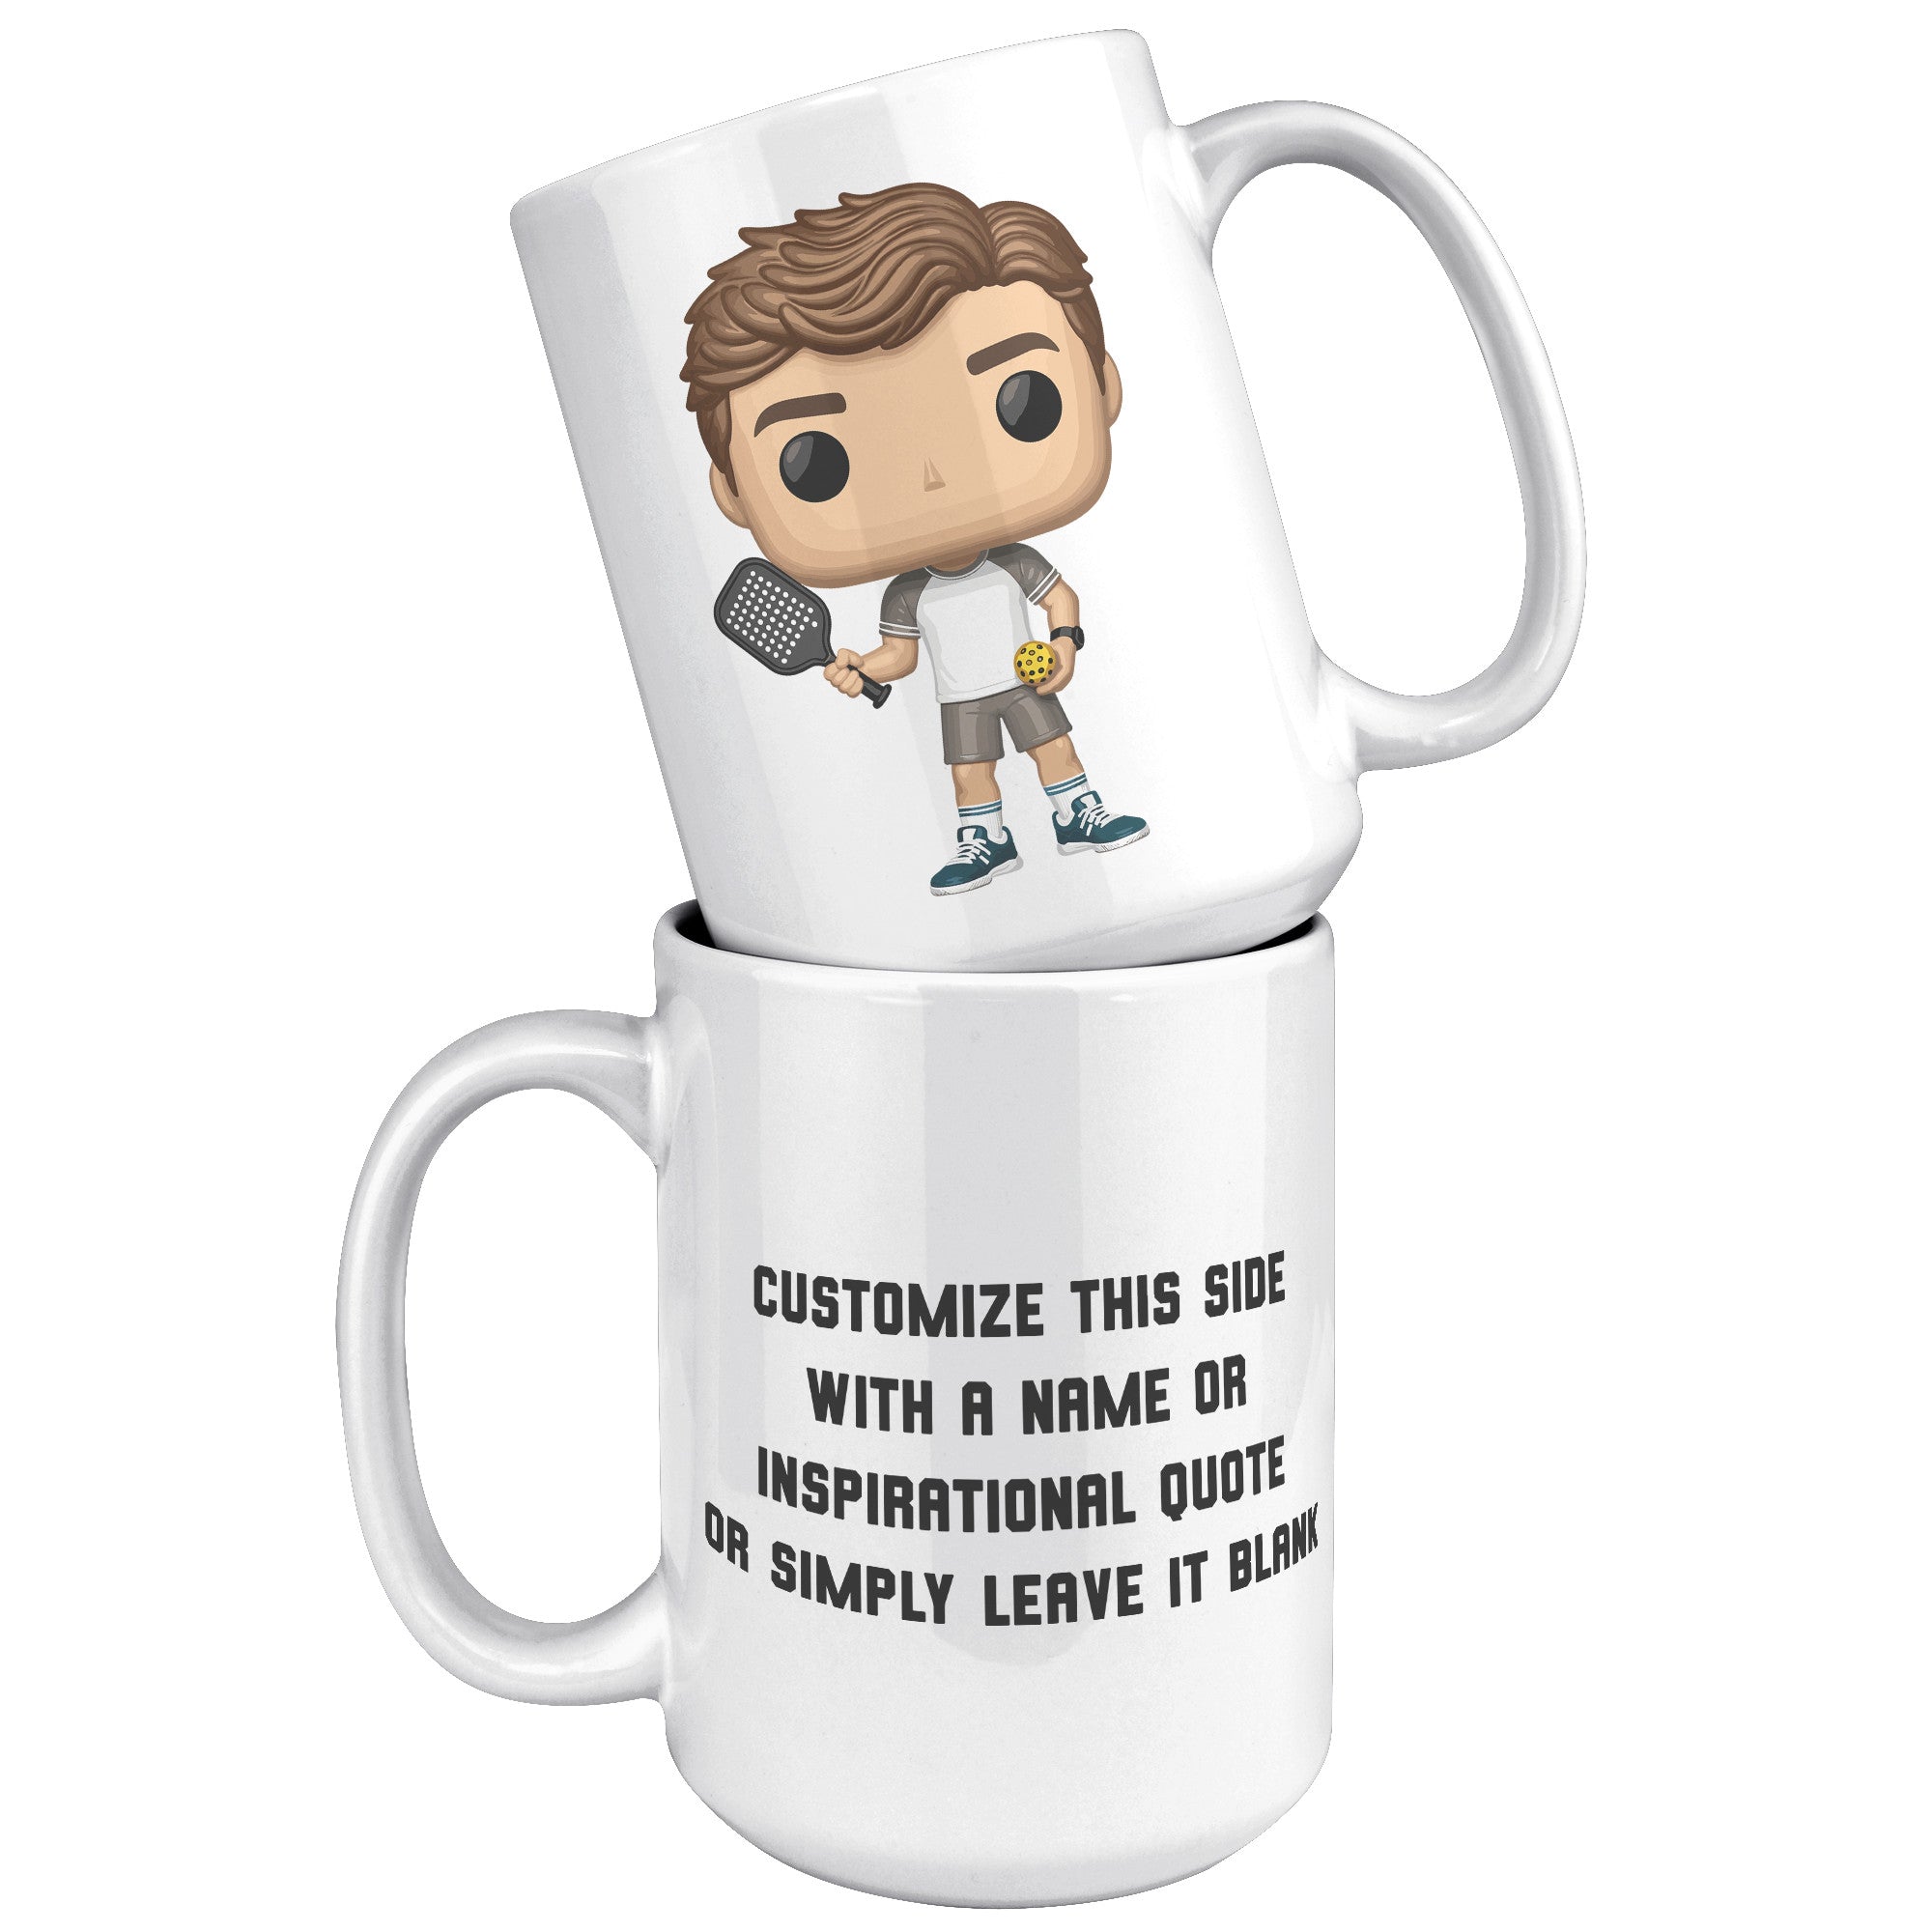 "Funko Pop Style Pickle Ball Player Boy Coffee Mug - Cute Athletic Cup - Perfect Gift for Pickle Ball Enthusiasts - Sporty Boy Apparel" - D1